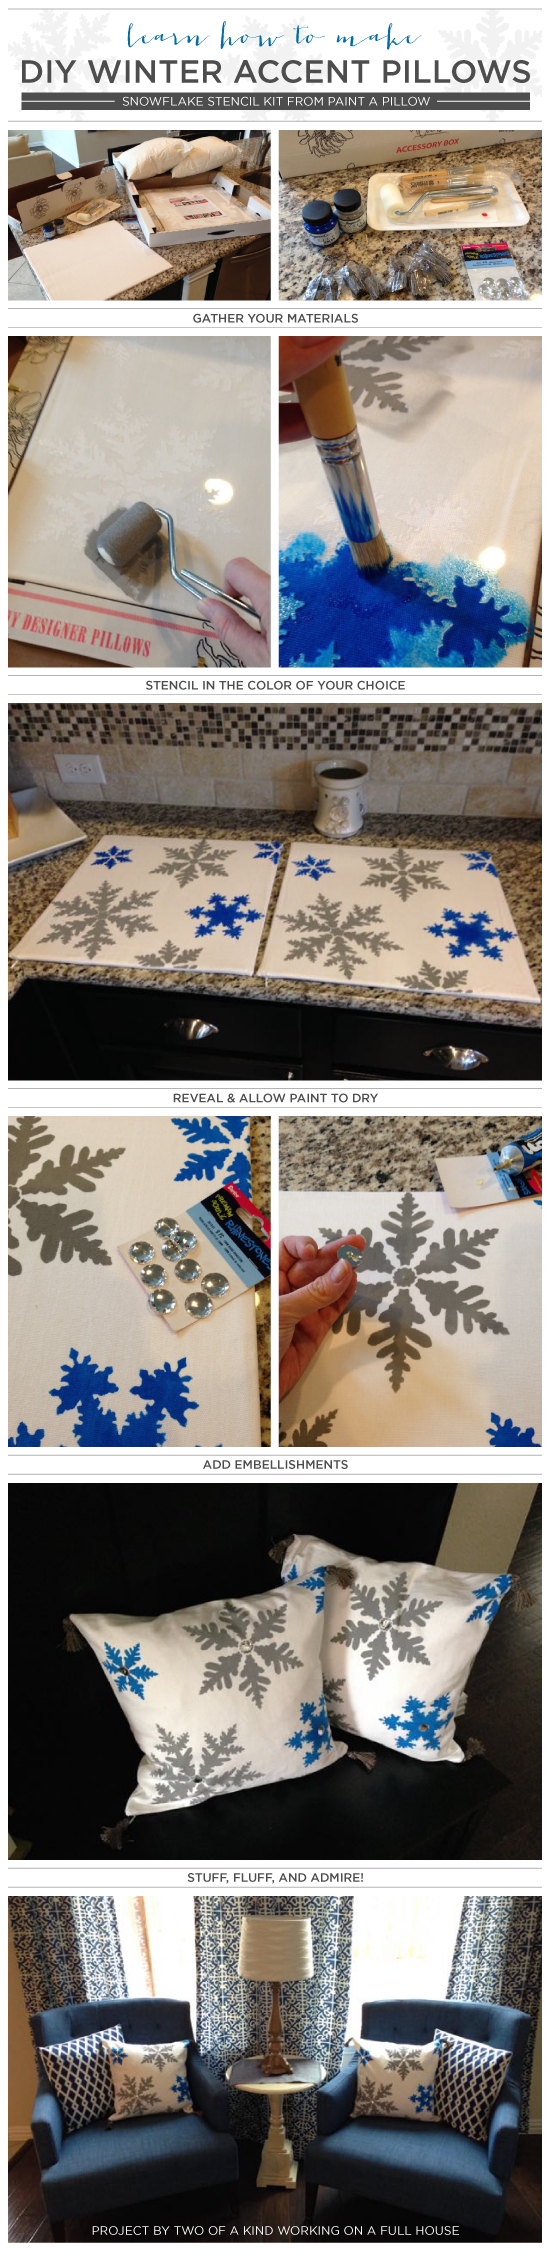 Cutting Edge Stencils shares how to create DIY accent pillows using the Snowflakes Paint-A-Pillow kit. http://paintapillow.com/index.php/snowflakes-paint-a-pillow-kit.html